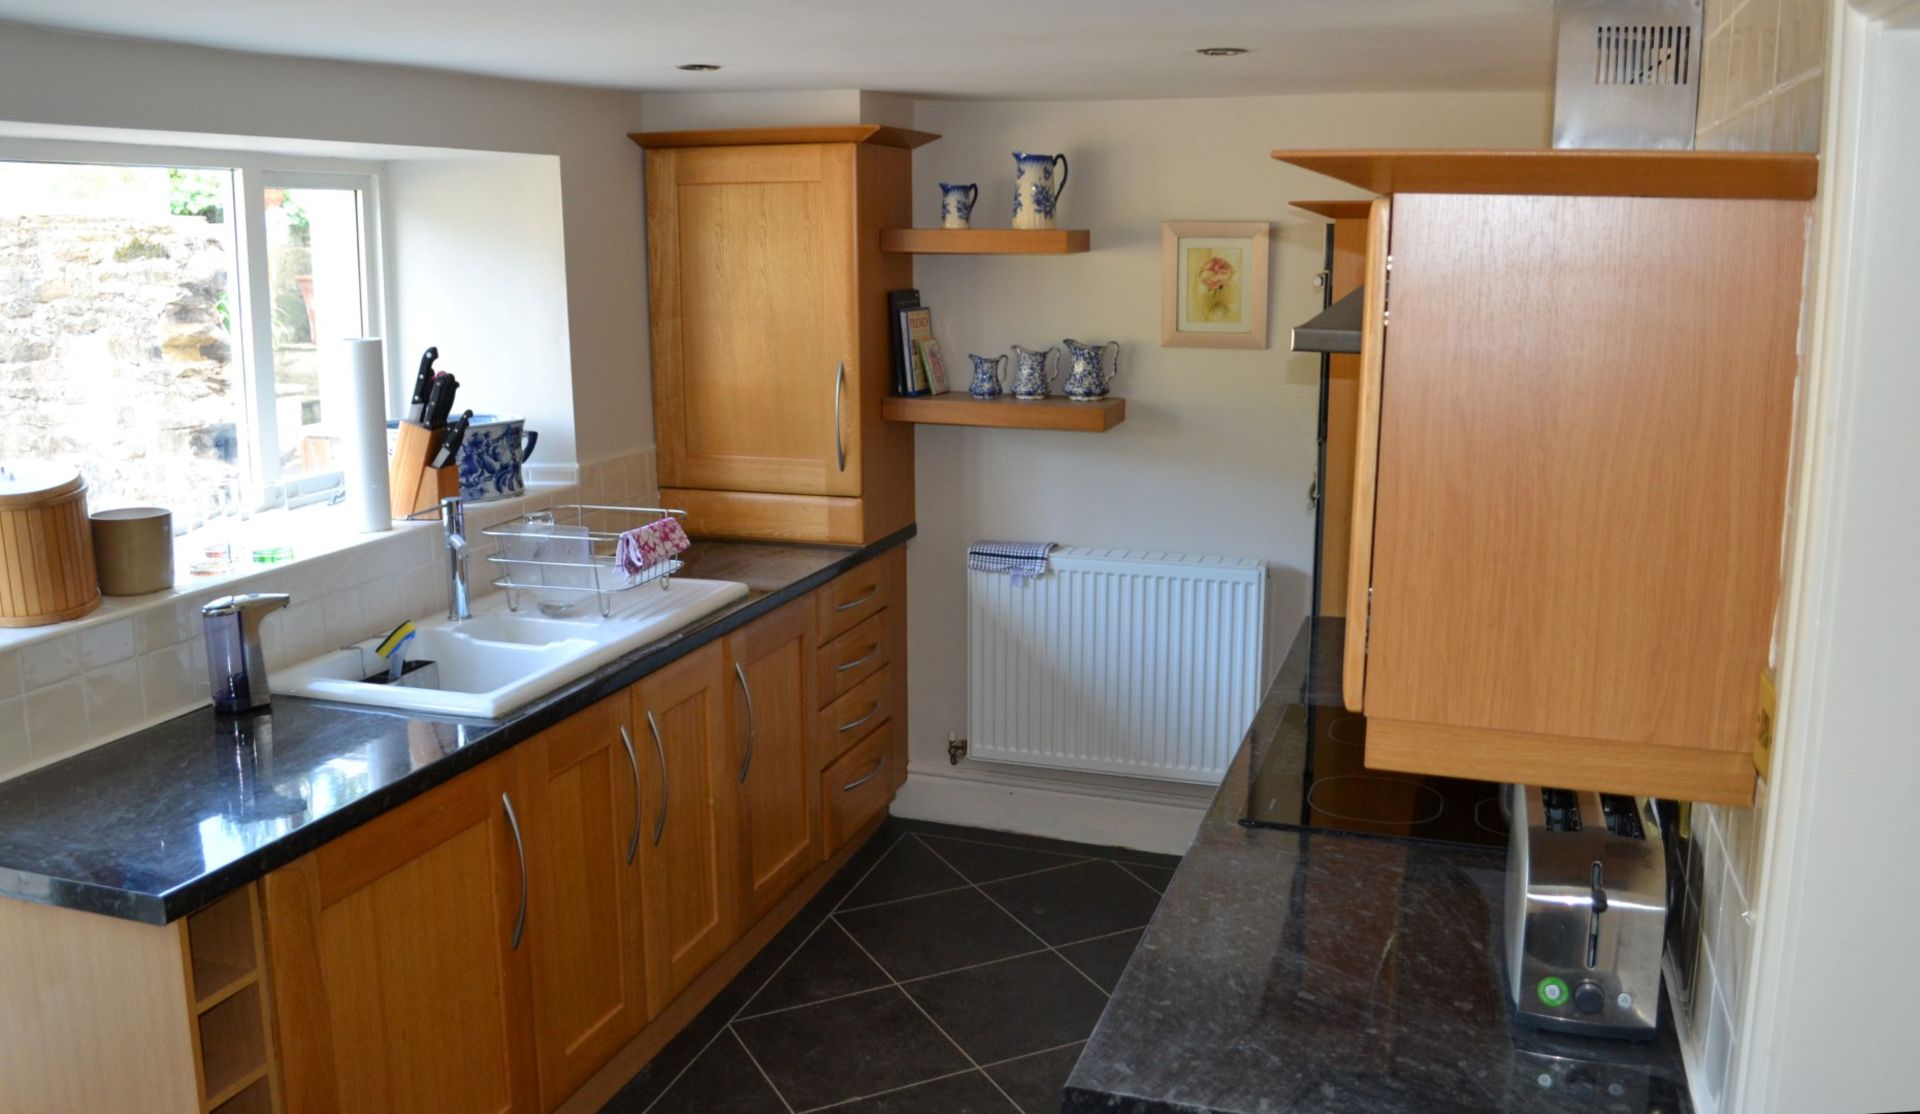 1 x Compact Fitted Kitchen With Neff and Tecnik Appliances - CL322 - Location: Pleasington, BB2 - *